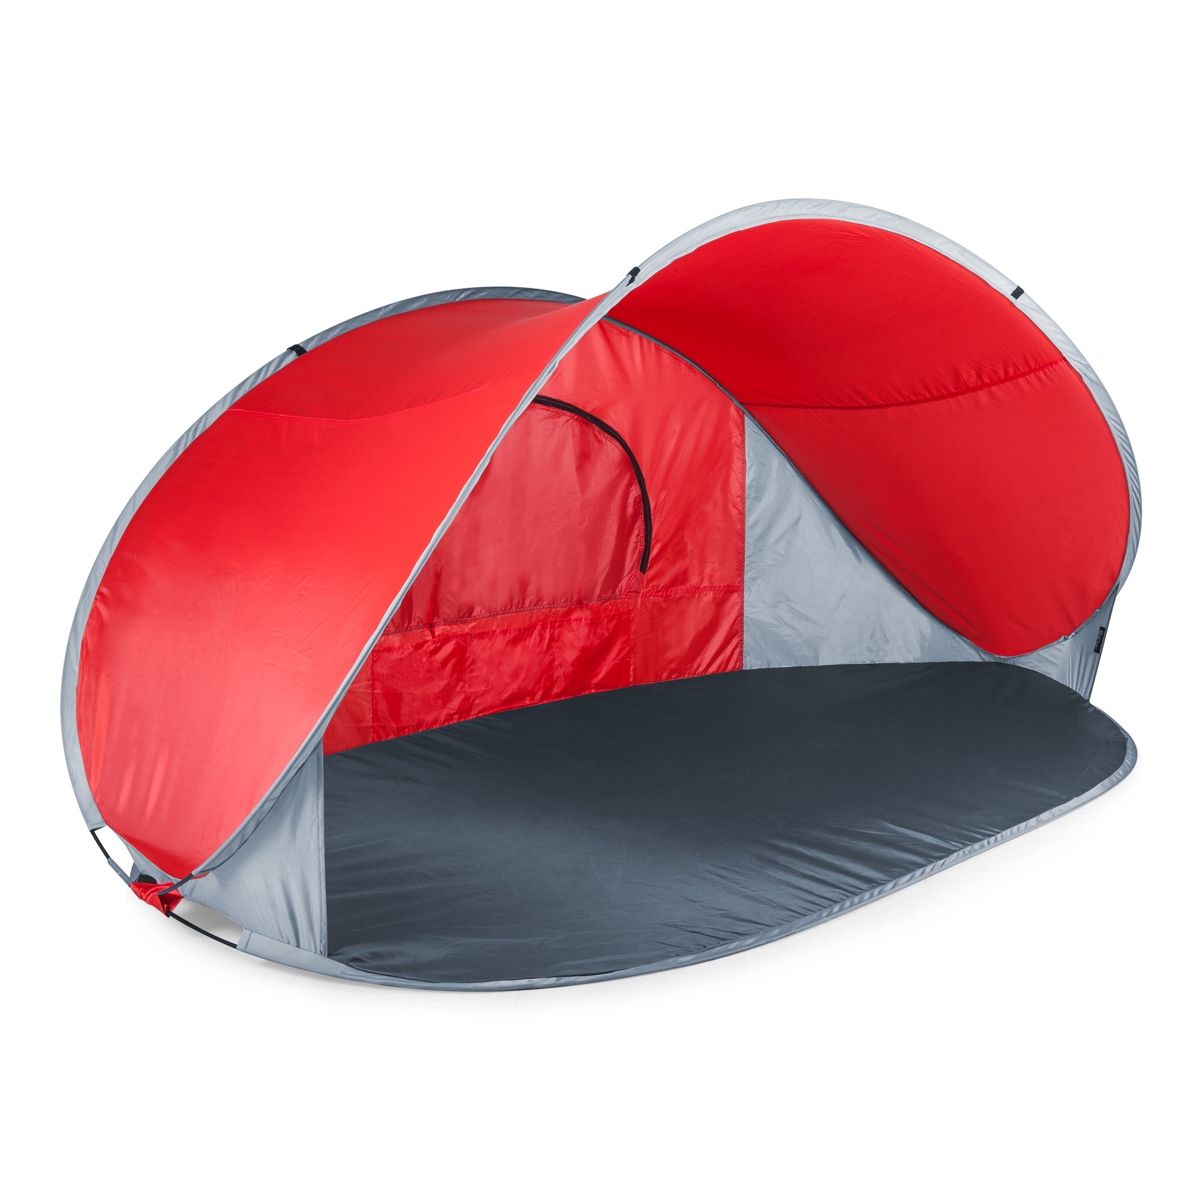 by Picnic Time Manta Portable Beach Tent - Red/gray/s